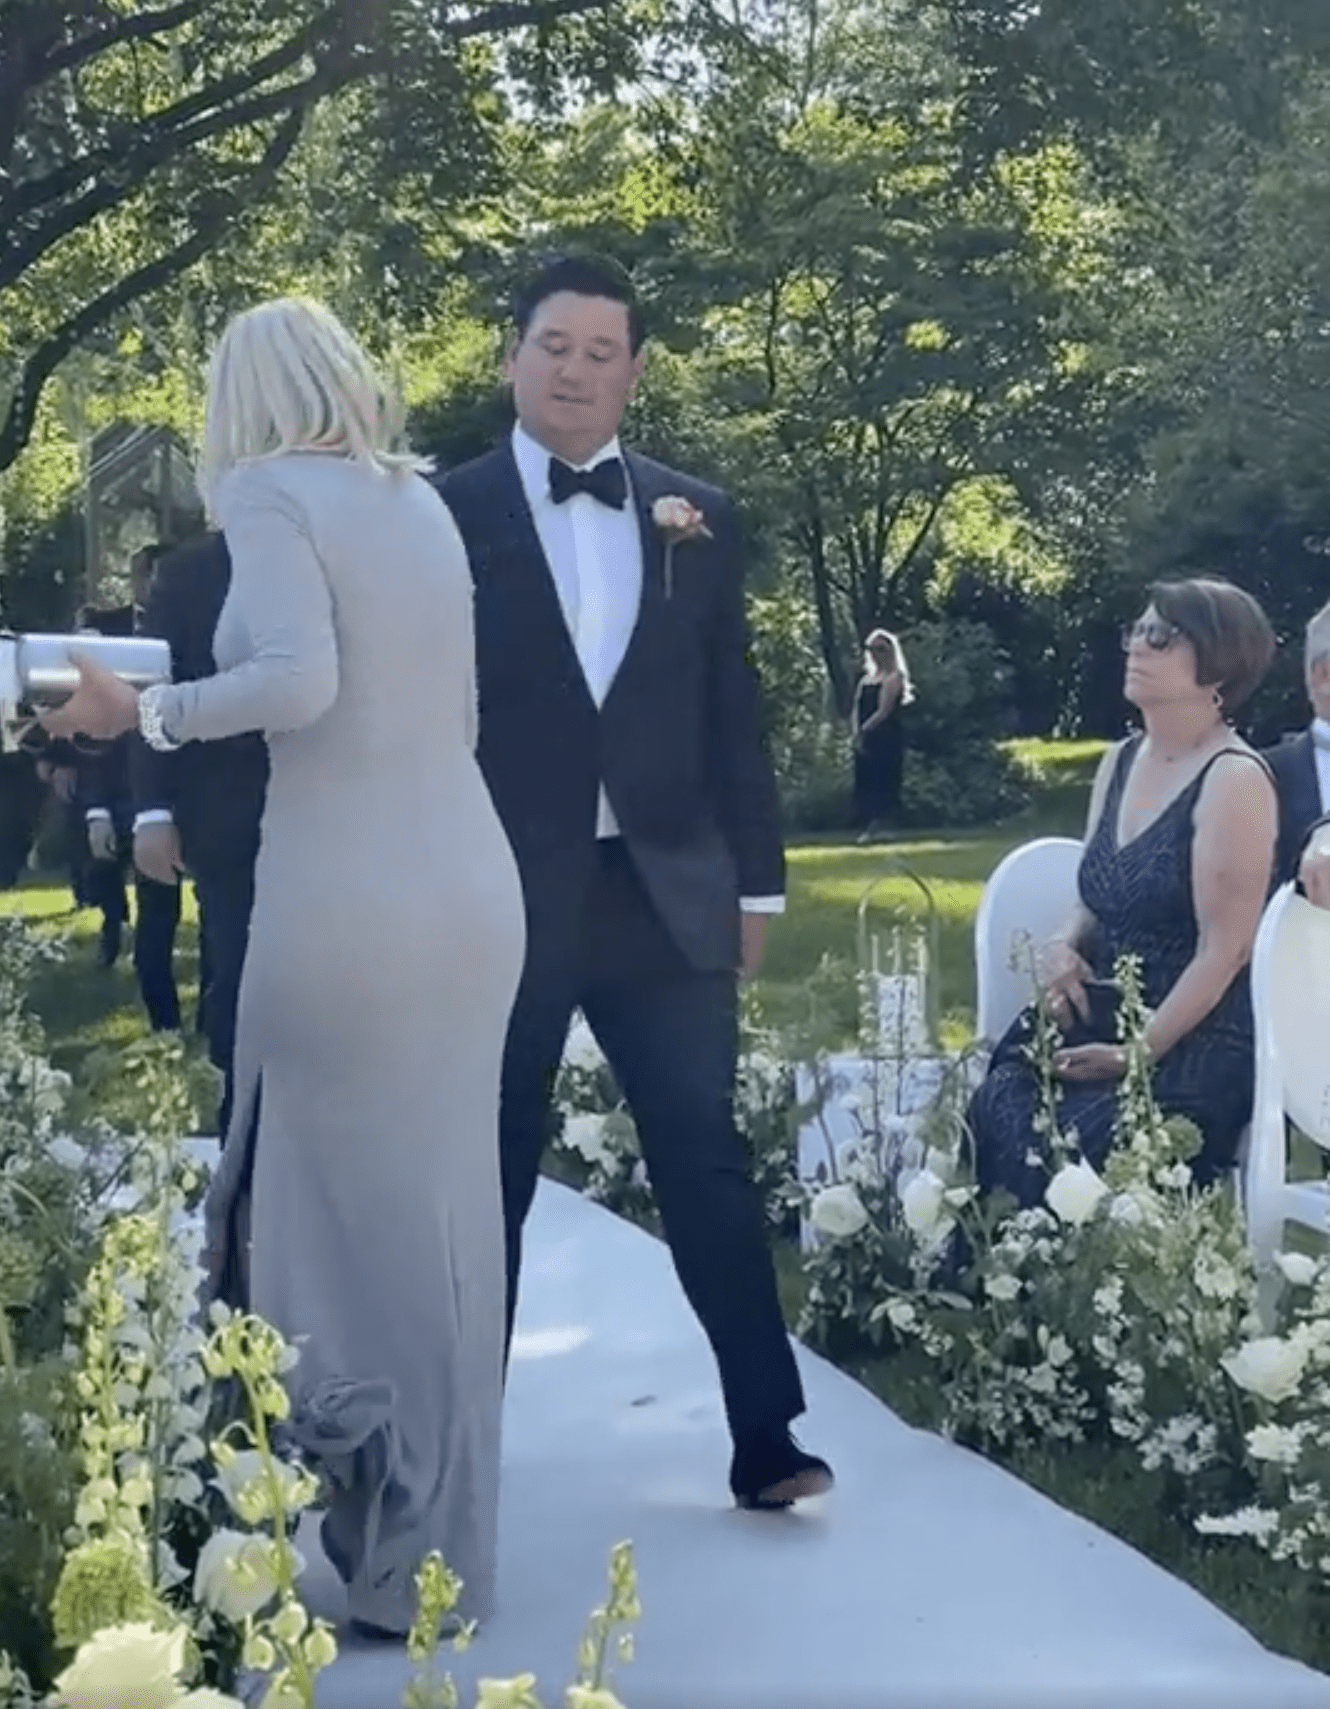 The lady in cream-colored dress barely escaped the aisle while the groom made his entry. | Source: reddit.com/r/weddingshaming